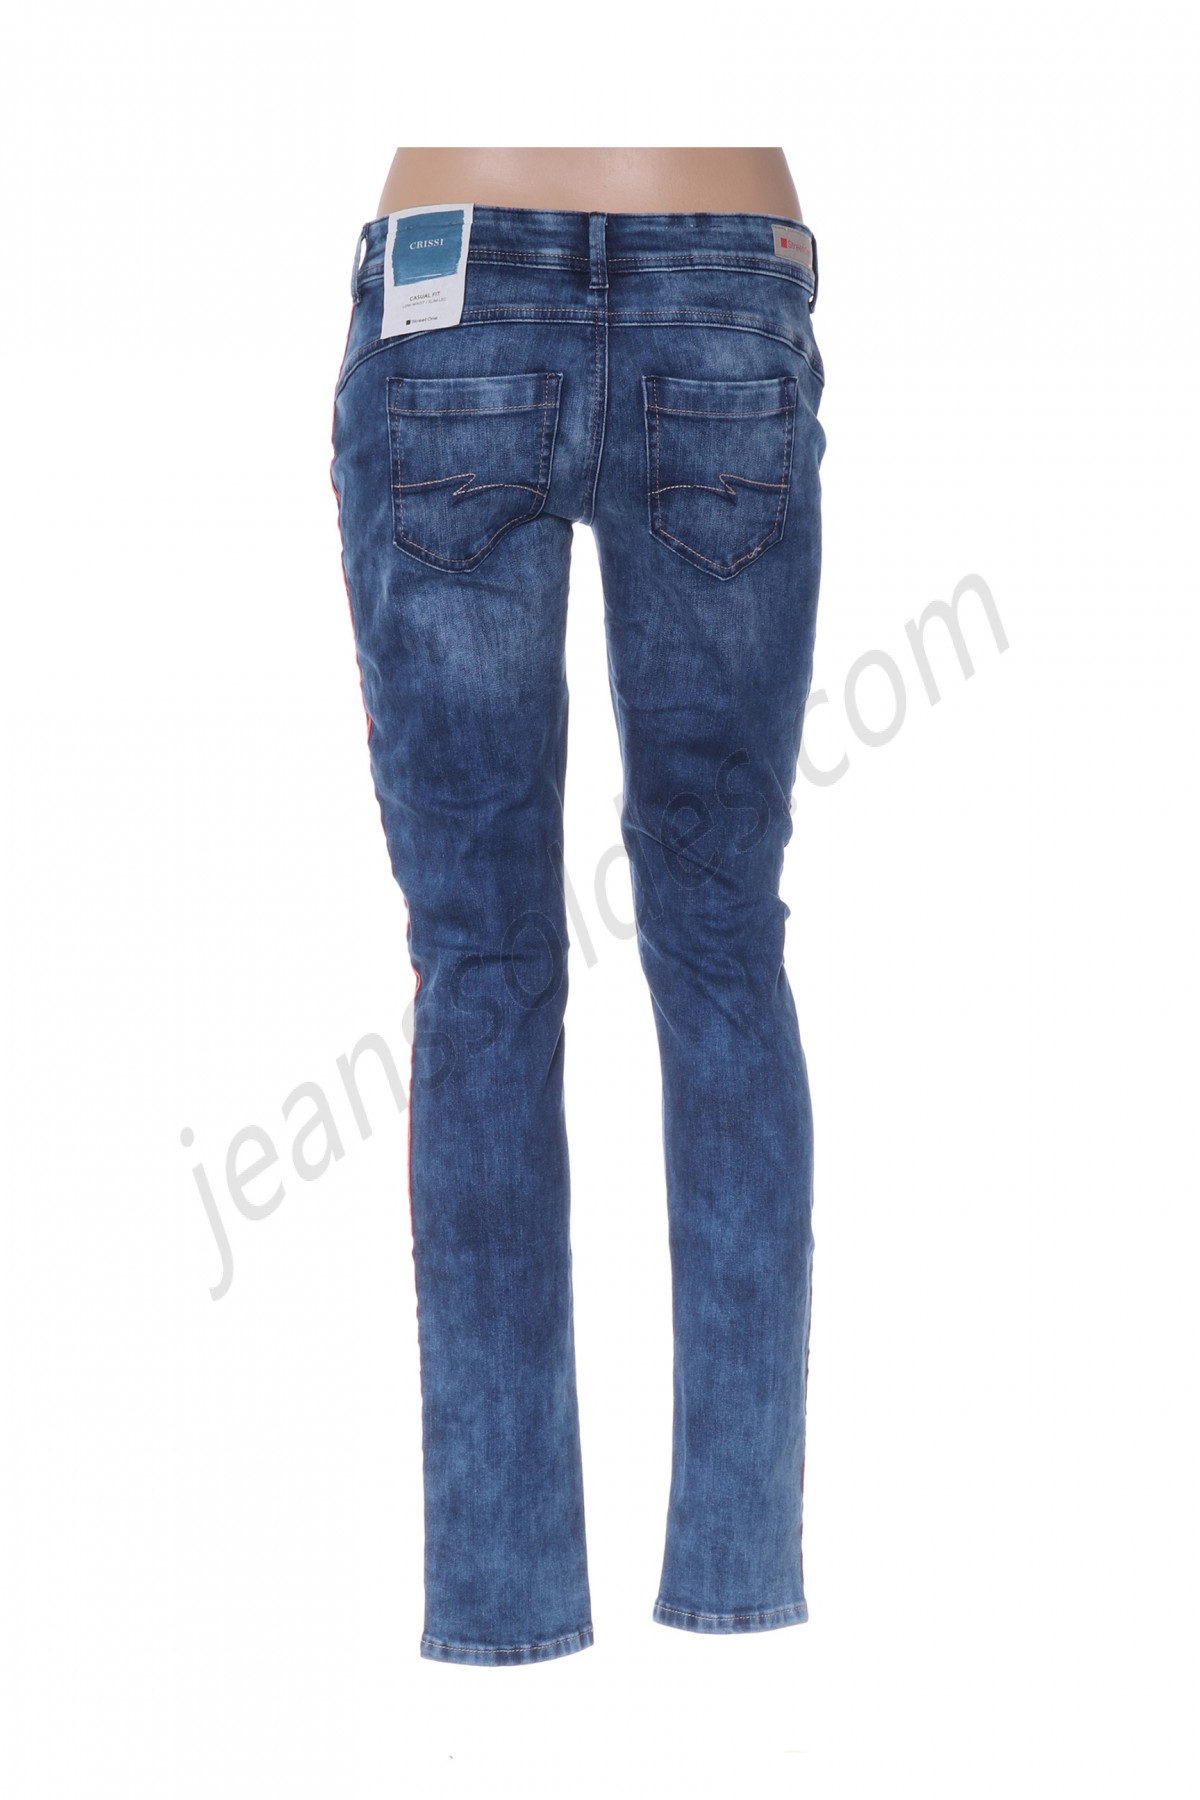 street one-Jeans coupe slim prix d’amis - -1